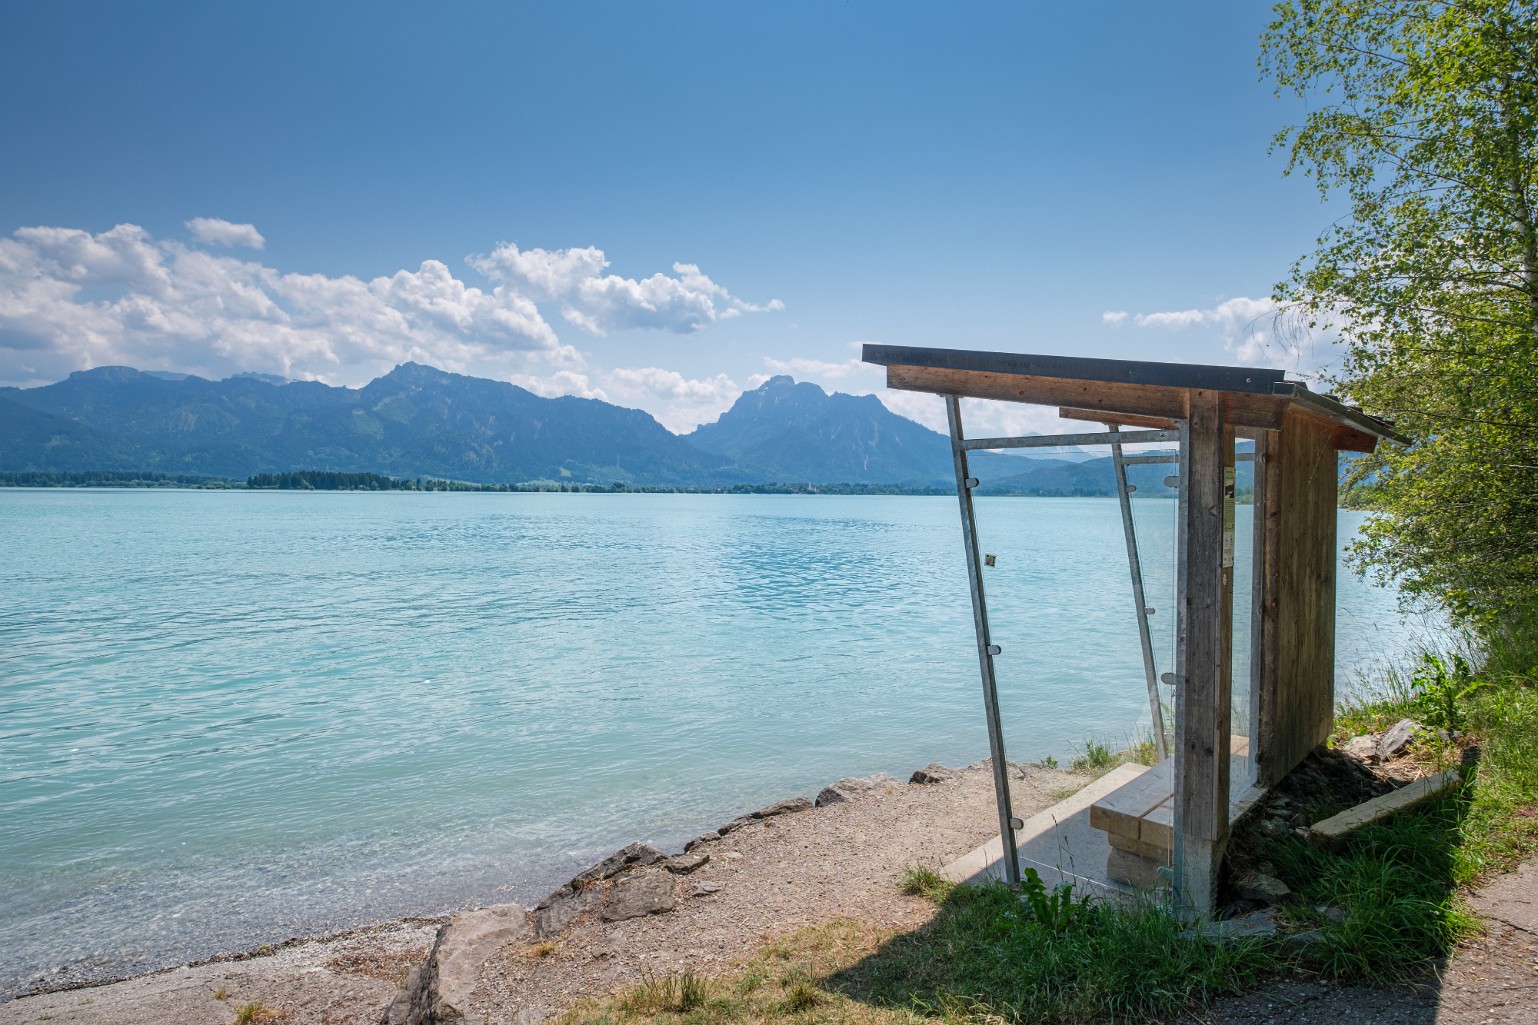 Forggensee_0479_2023-06-X-T4_12,6mm_f6,4_750s_160 ISO_LR_4kPx